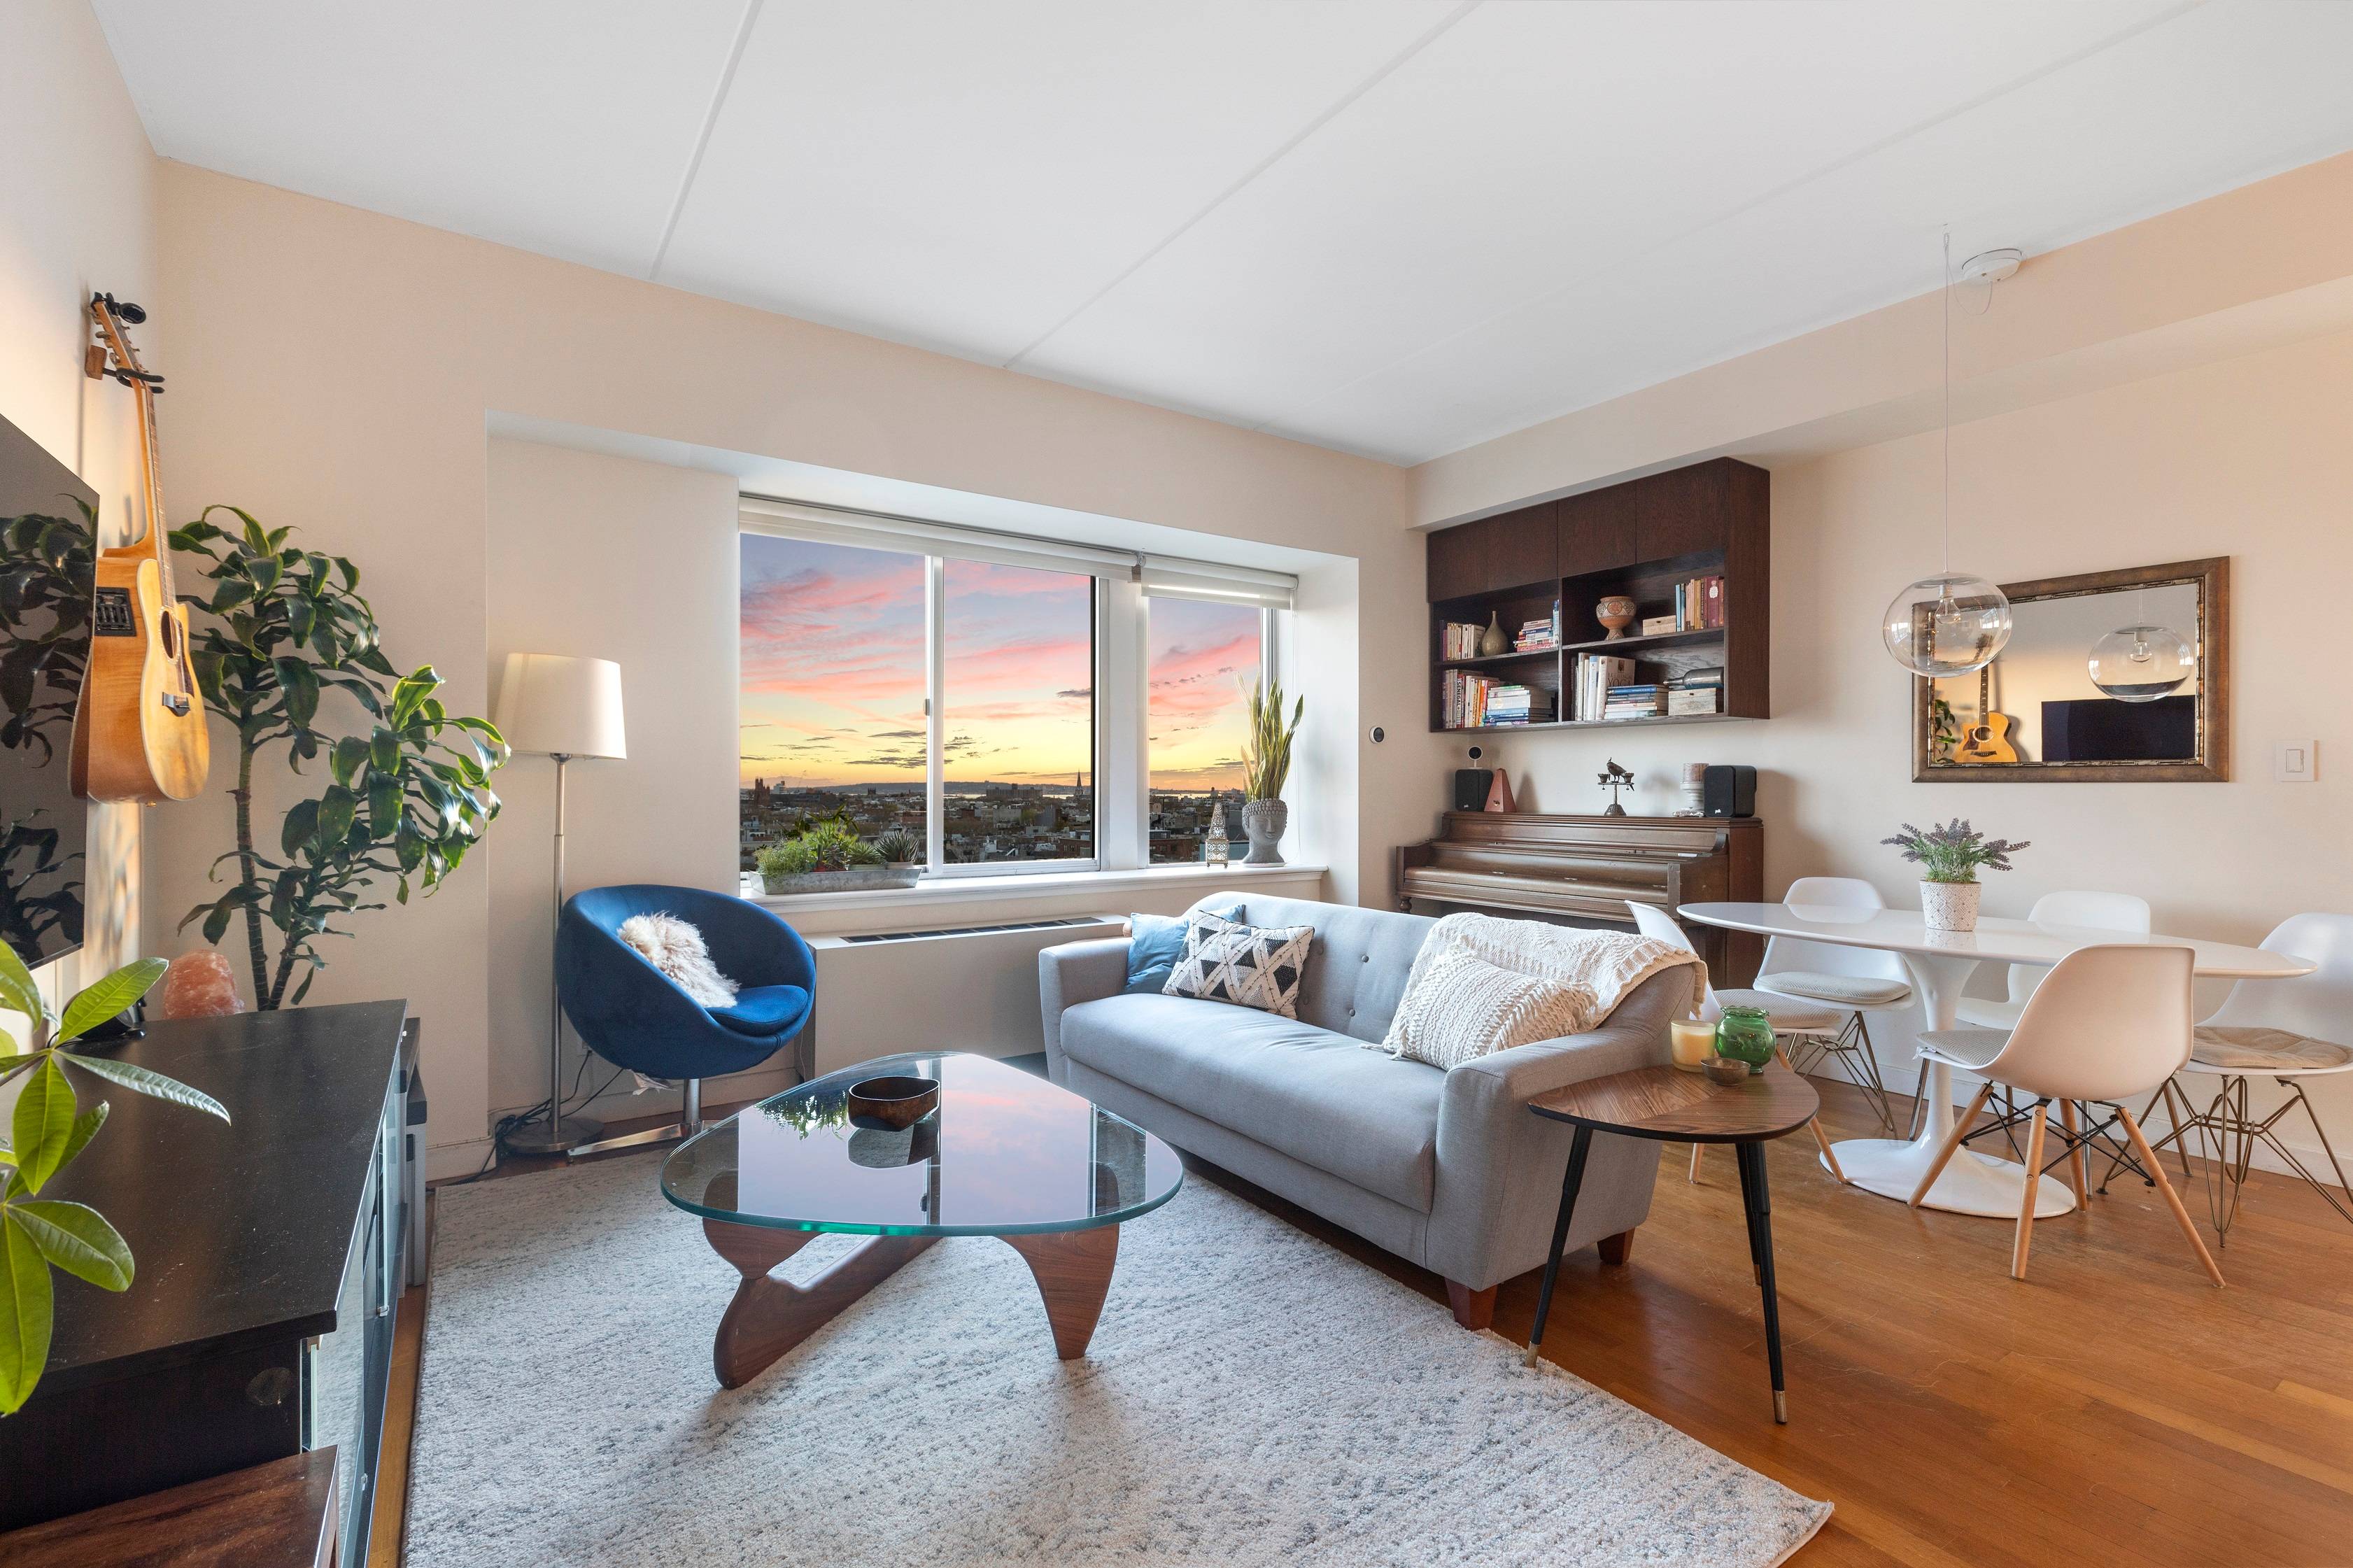 Views for miles ! Impressively scaled windows frame breathtaking panoramic views of Brooklyn in this chic, modern and expansive 2 bed, 2 bath, corner condo in prime Boerum Hill.